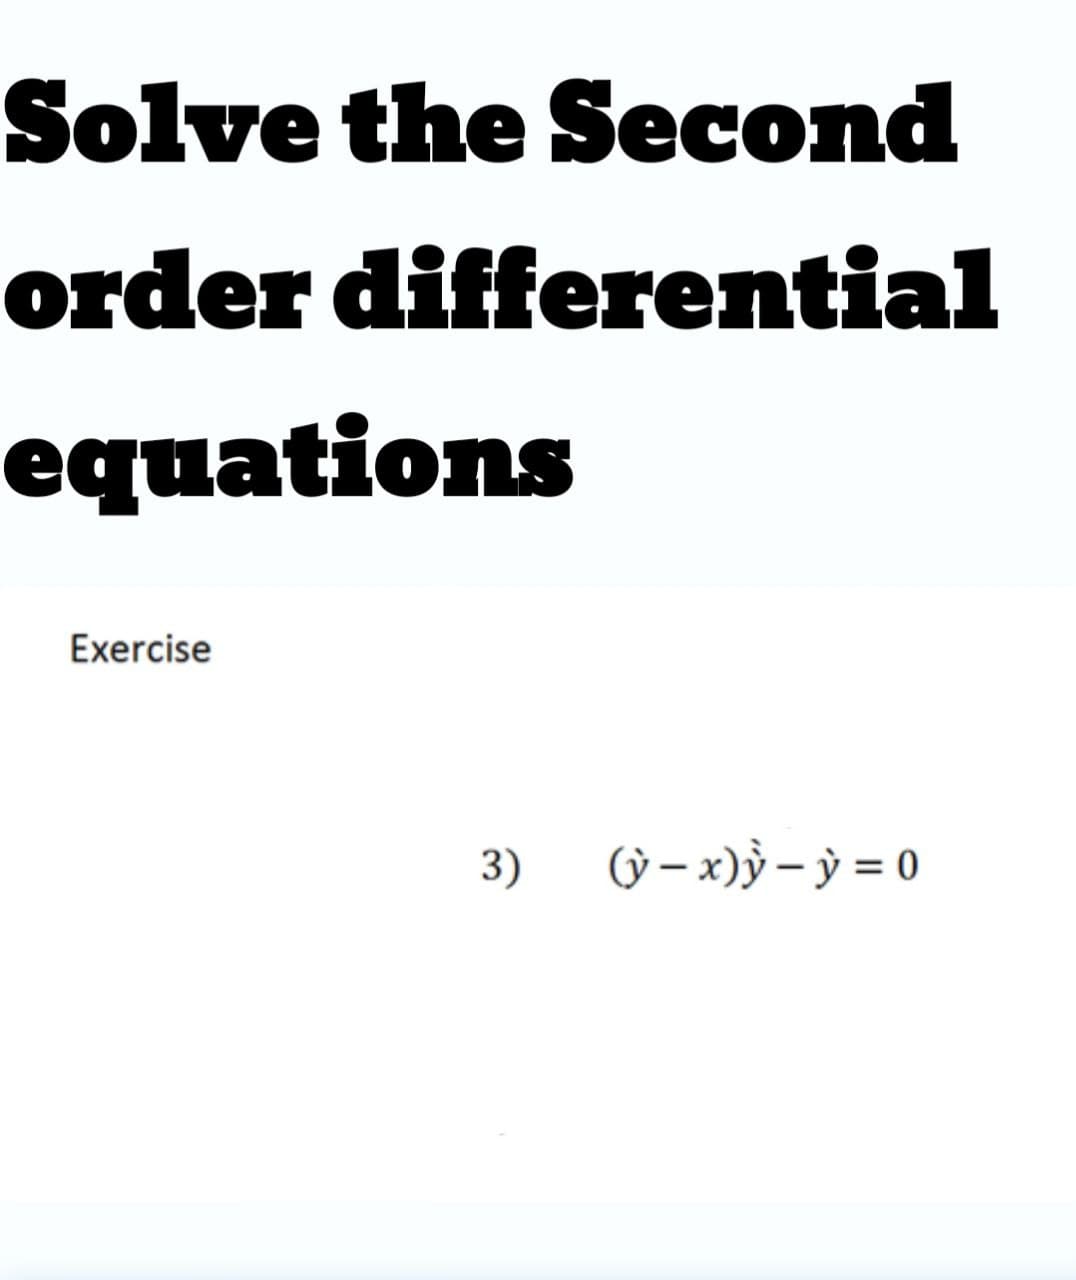 Solve the Sесond
order differential
еquations
Exercise
3)
(ỳ – x)ỳ – ỳ = 0
